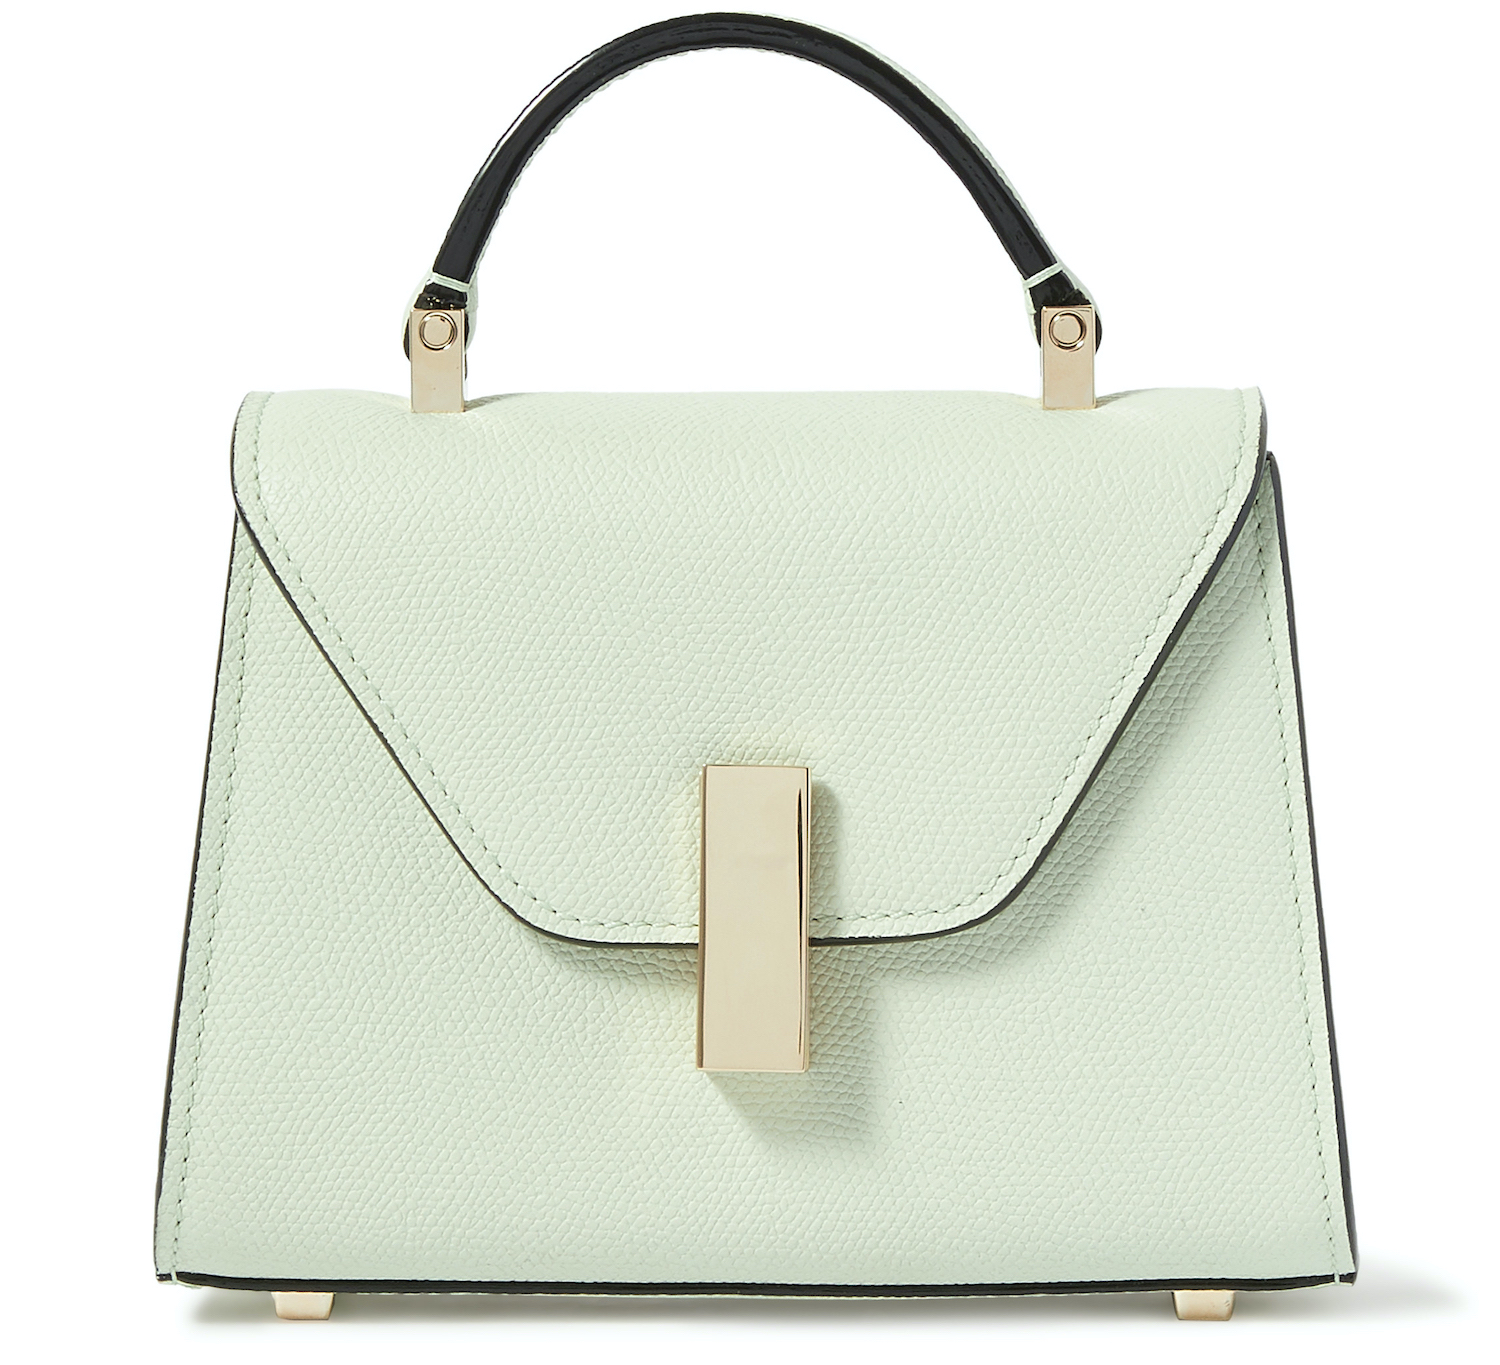 10 Mini Bags That Remind Us of Easter Eggs